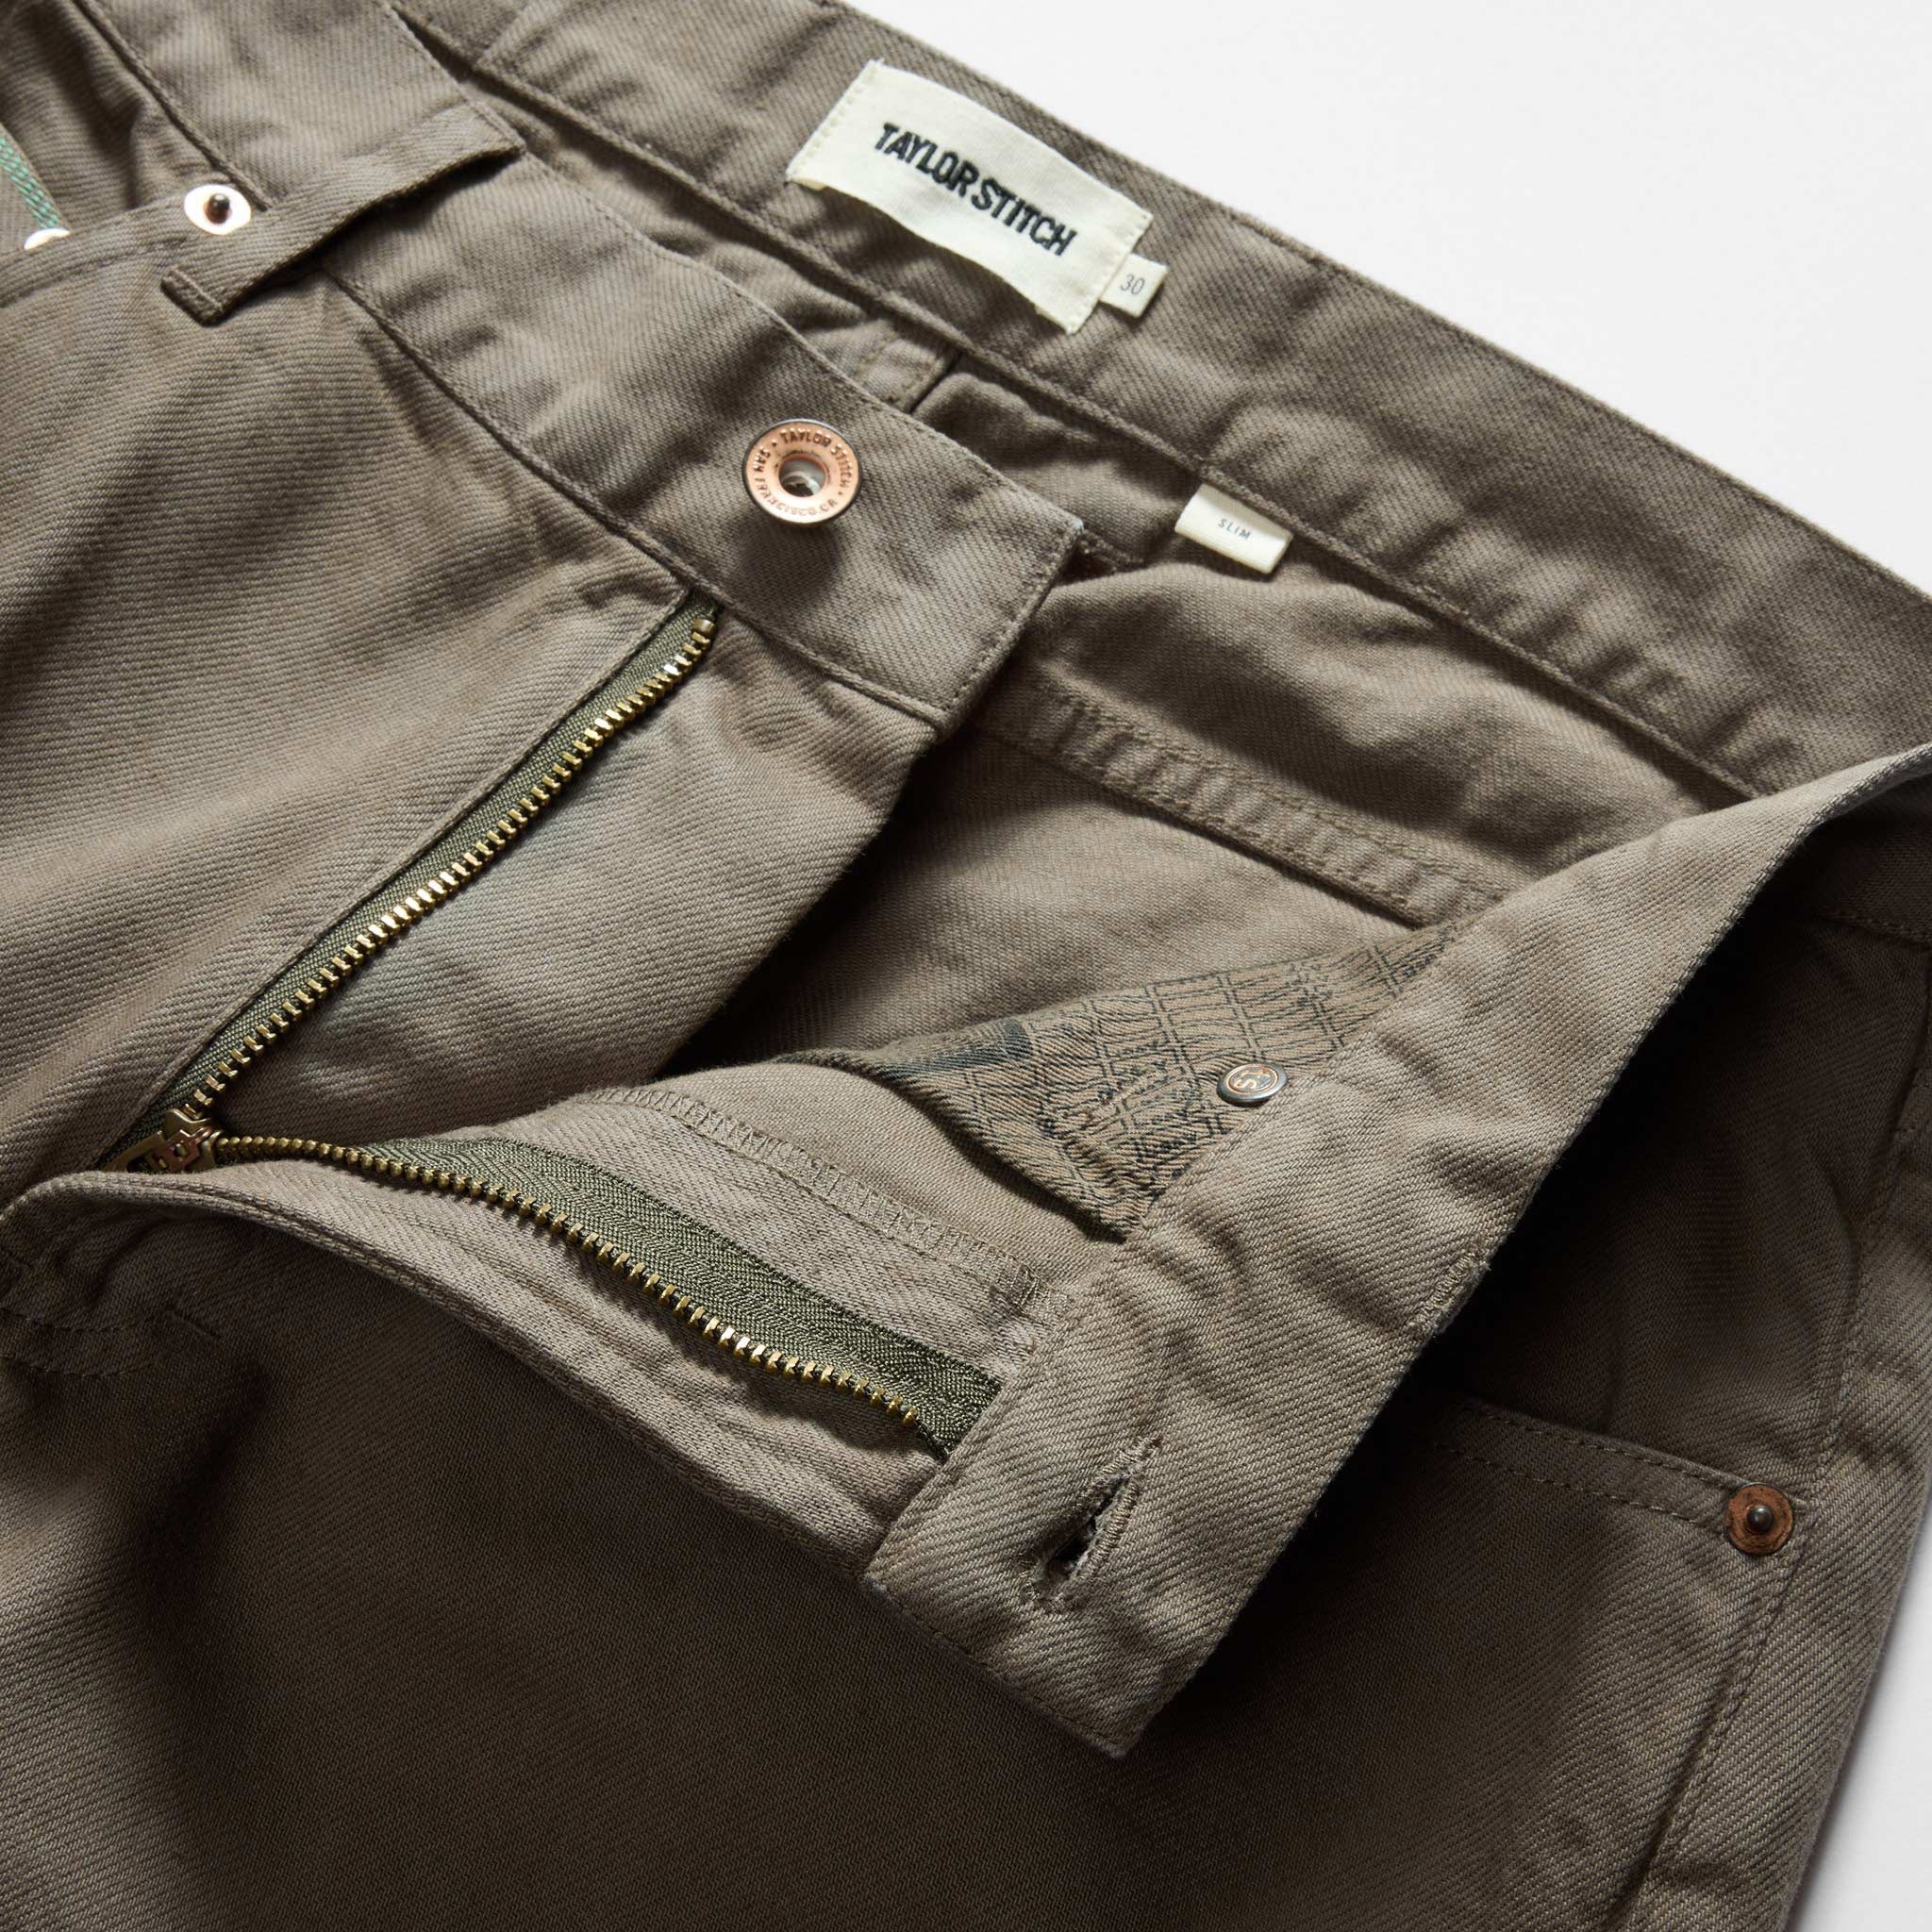 The Slim All Day Pant in Fatigue Olive Selvage Denim